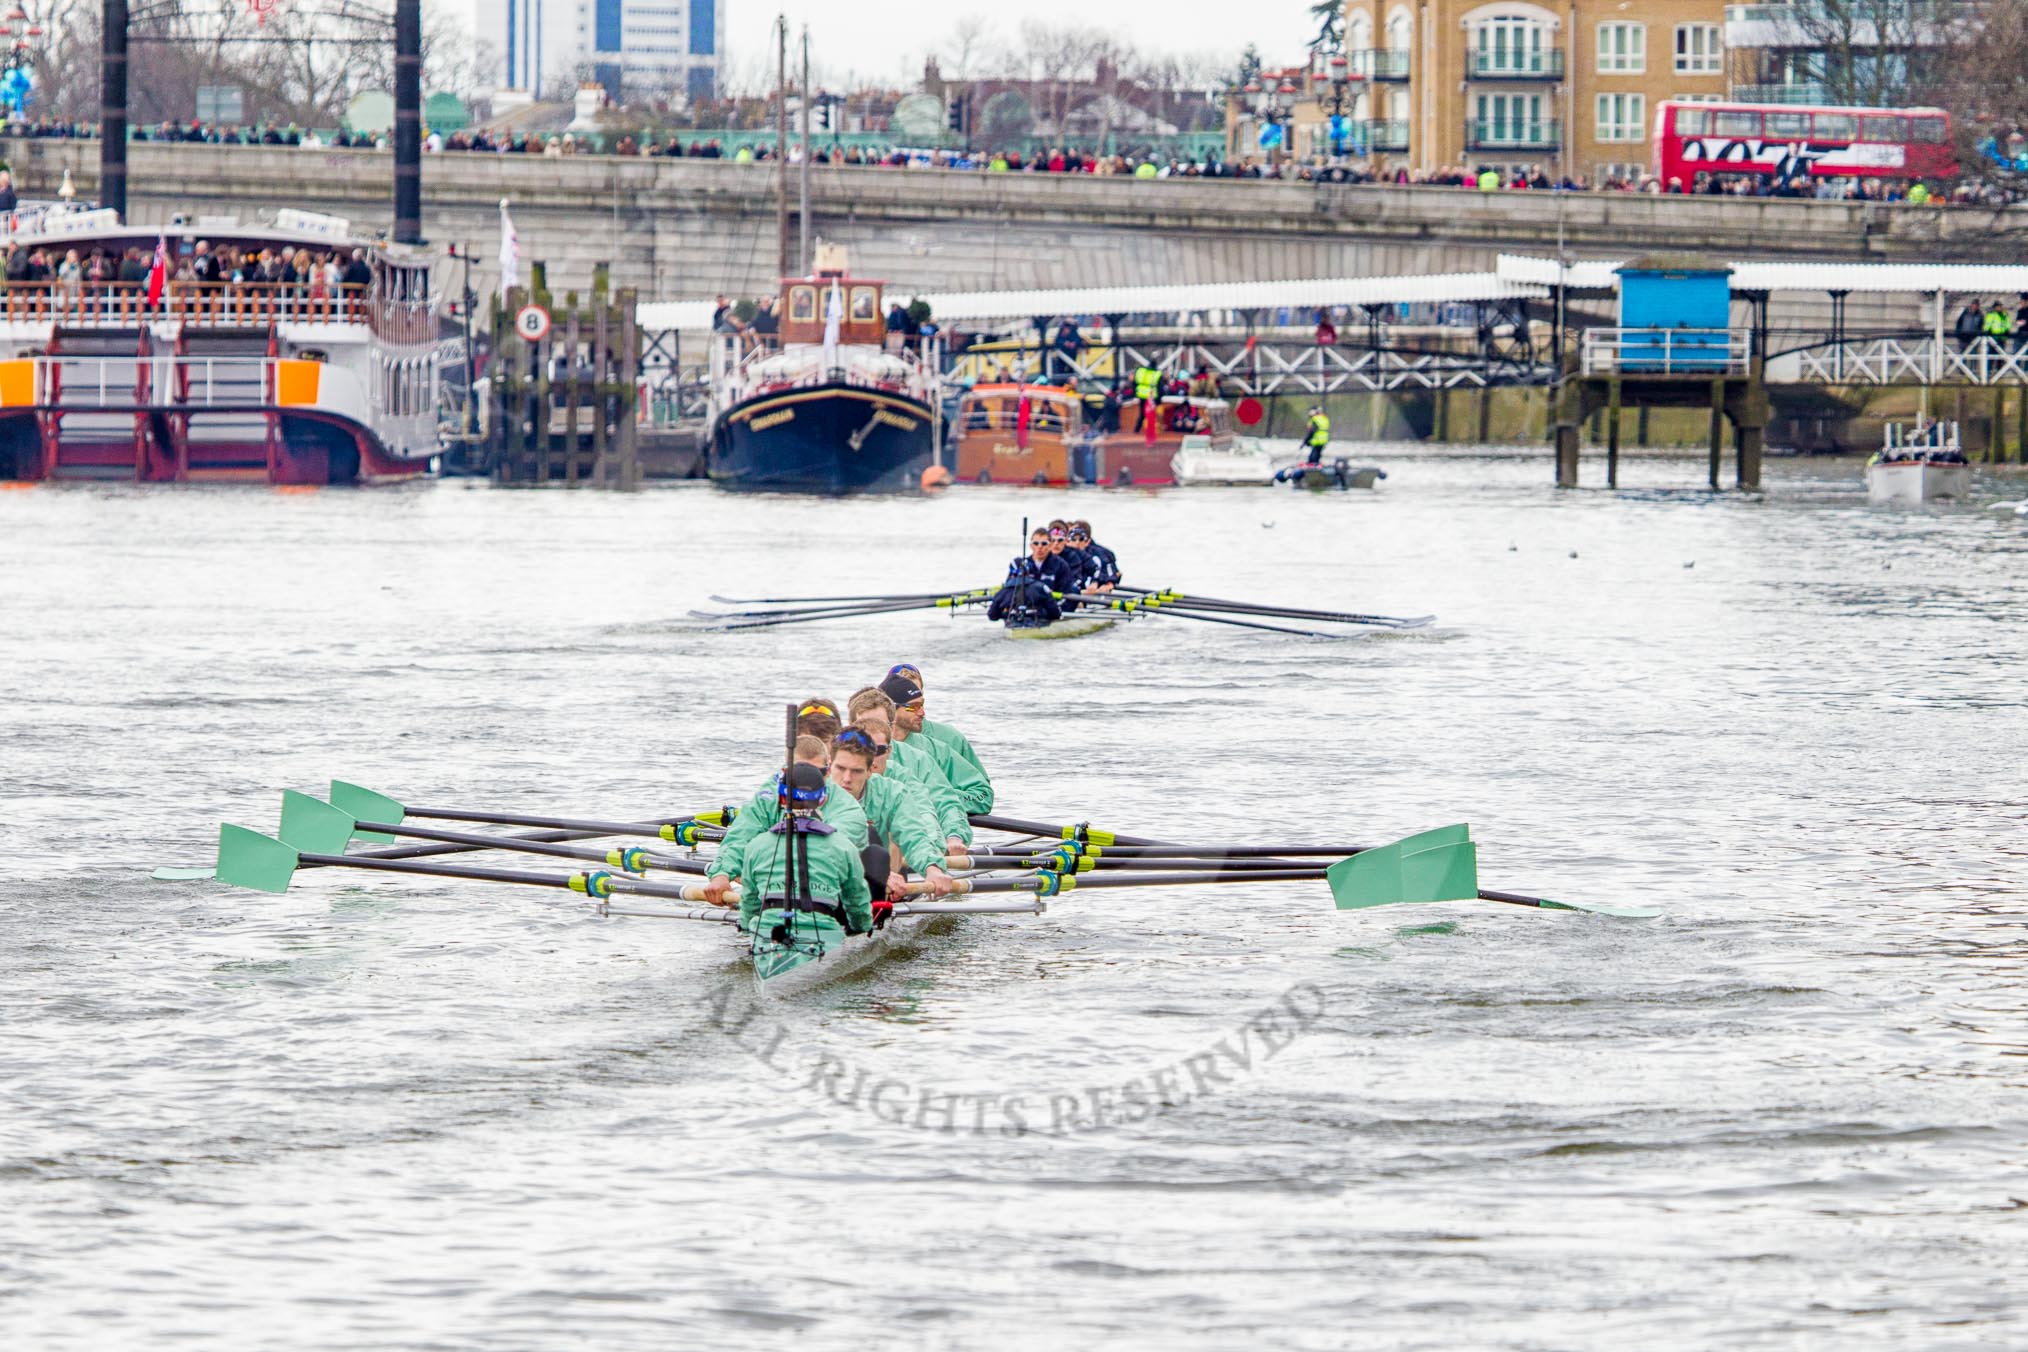 The Boat Race 2013.
Putney,
London SW15,

United Kingdom,
on 31 March 2013 at 15:49, image #175